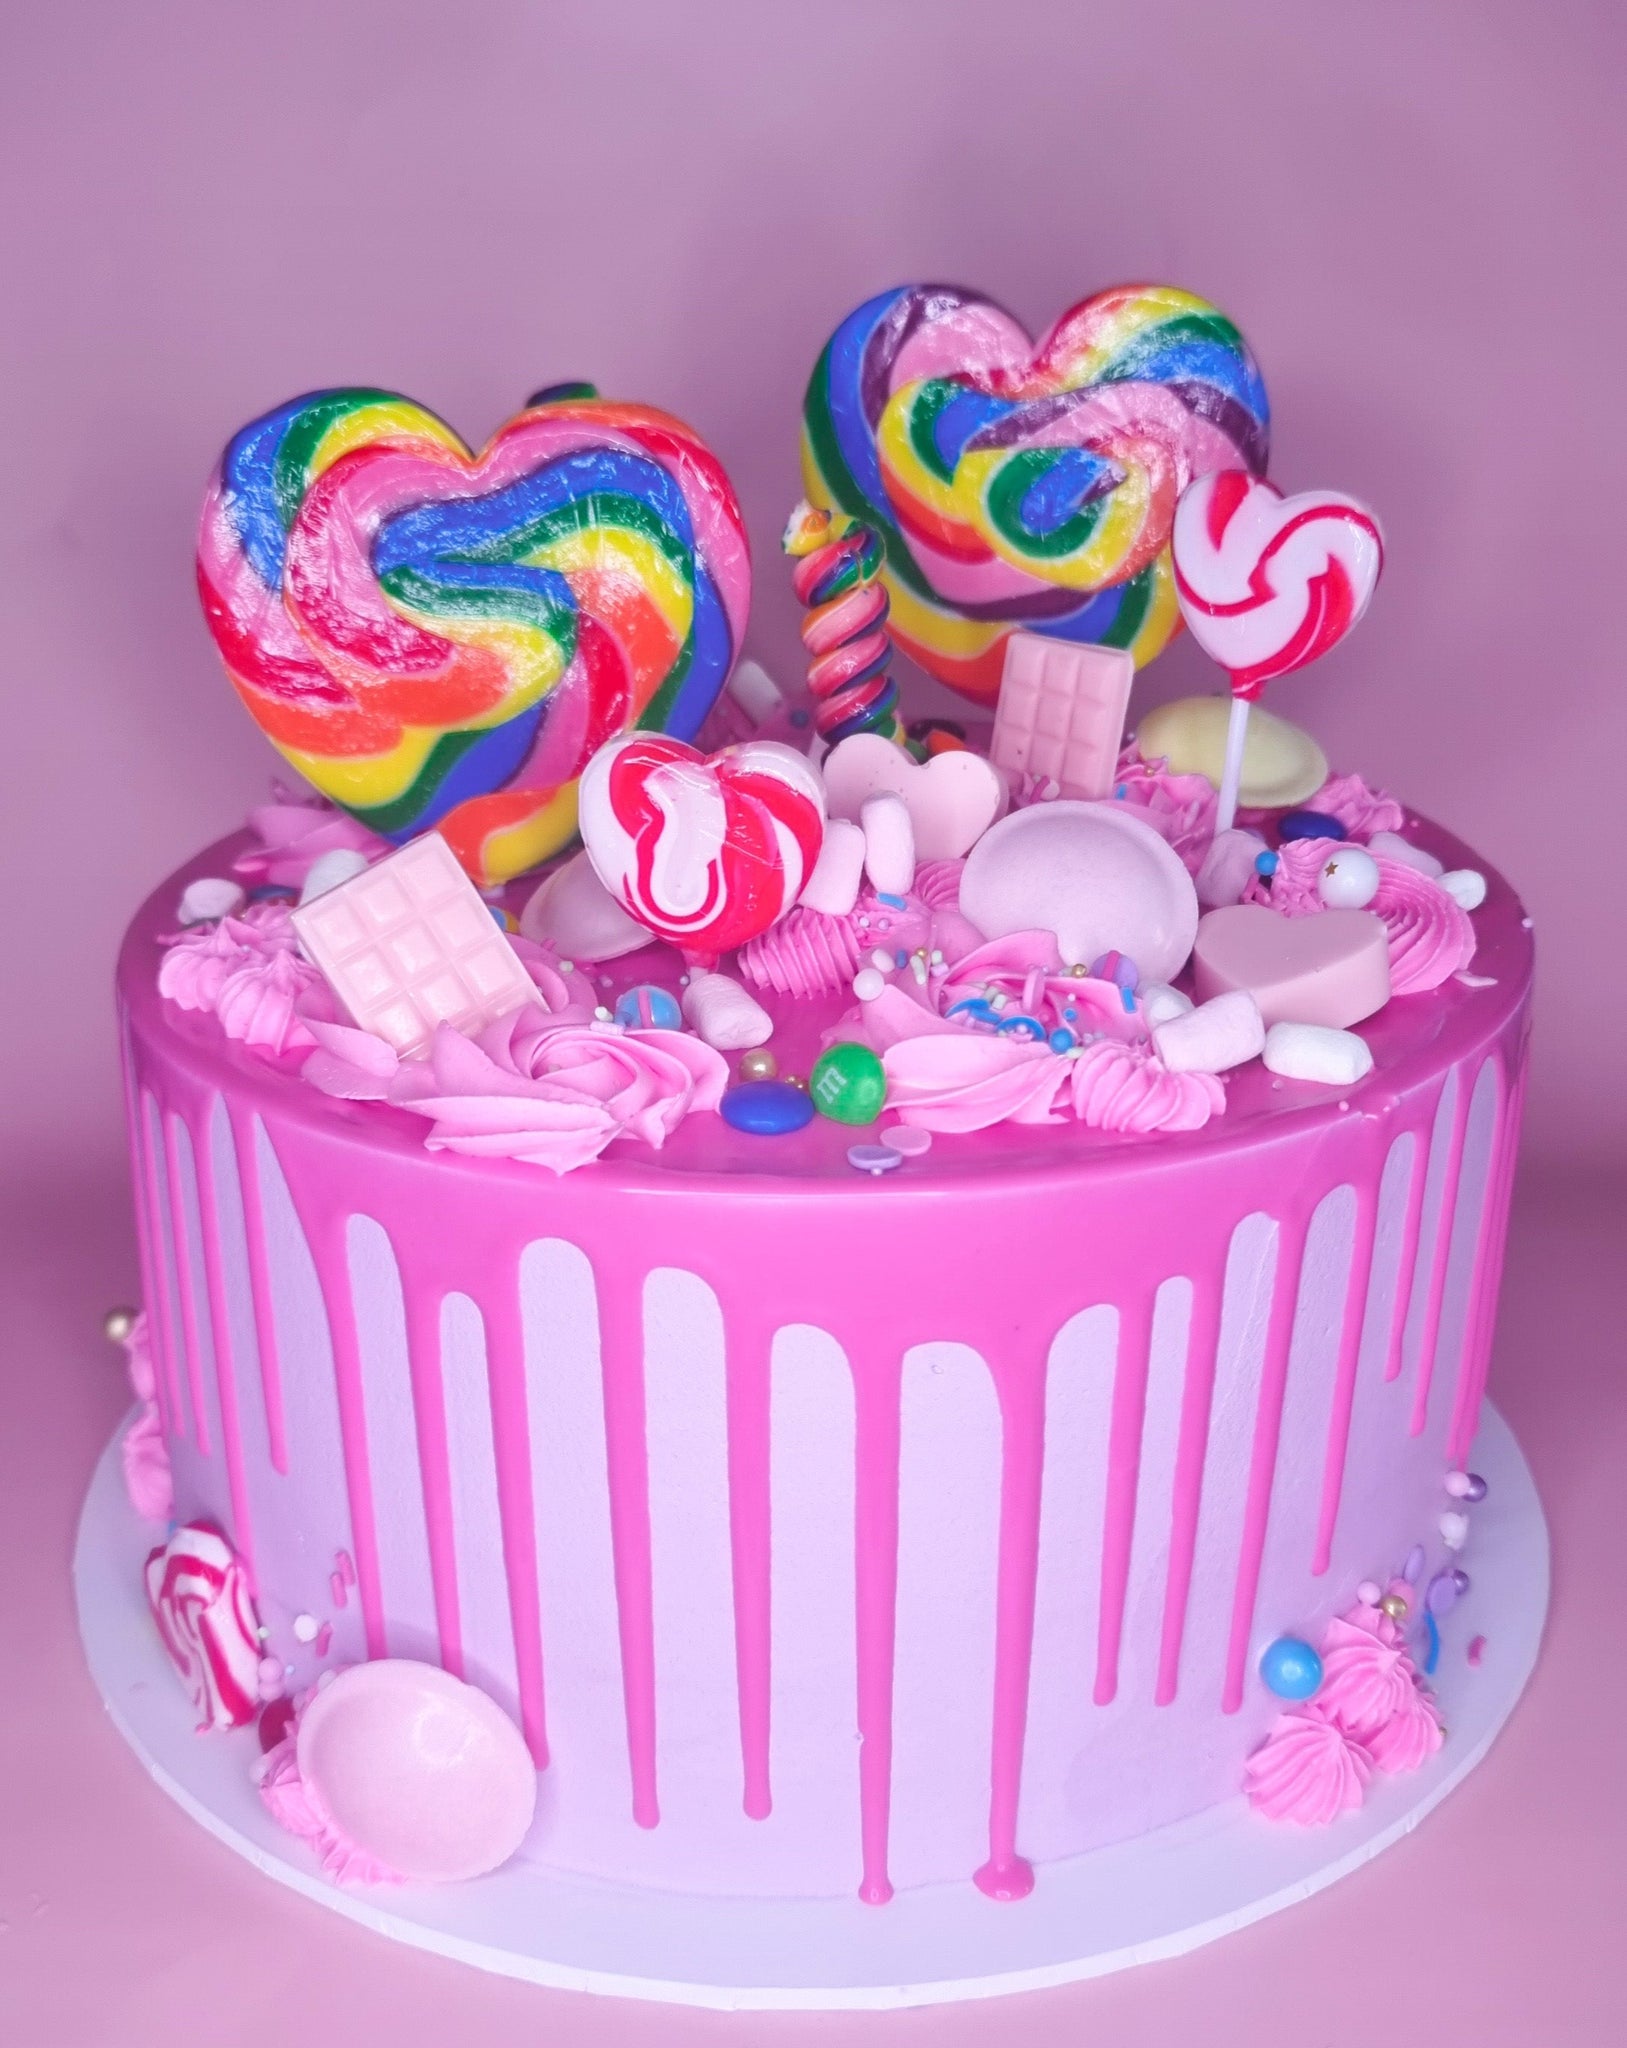 How to Make a Candy Land Cake / Easy Cake Design for Beginners - YouTube